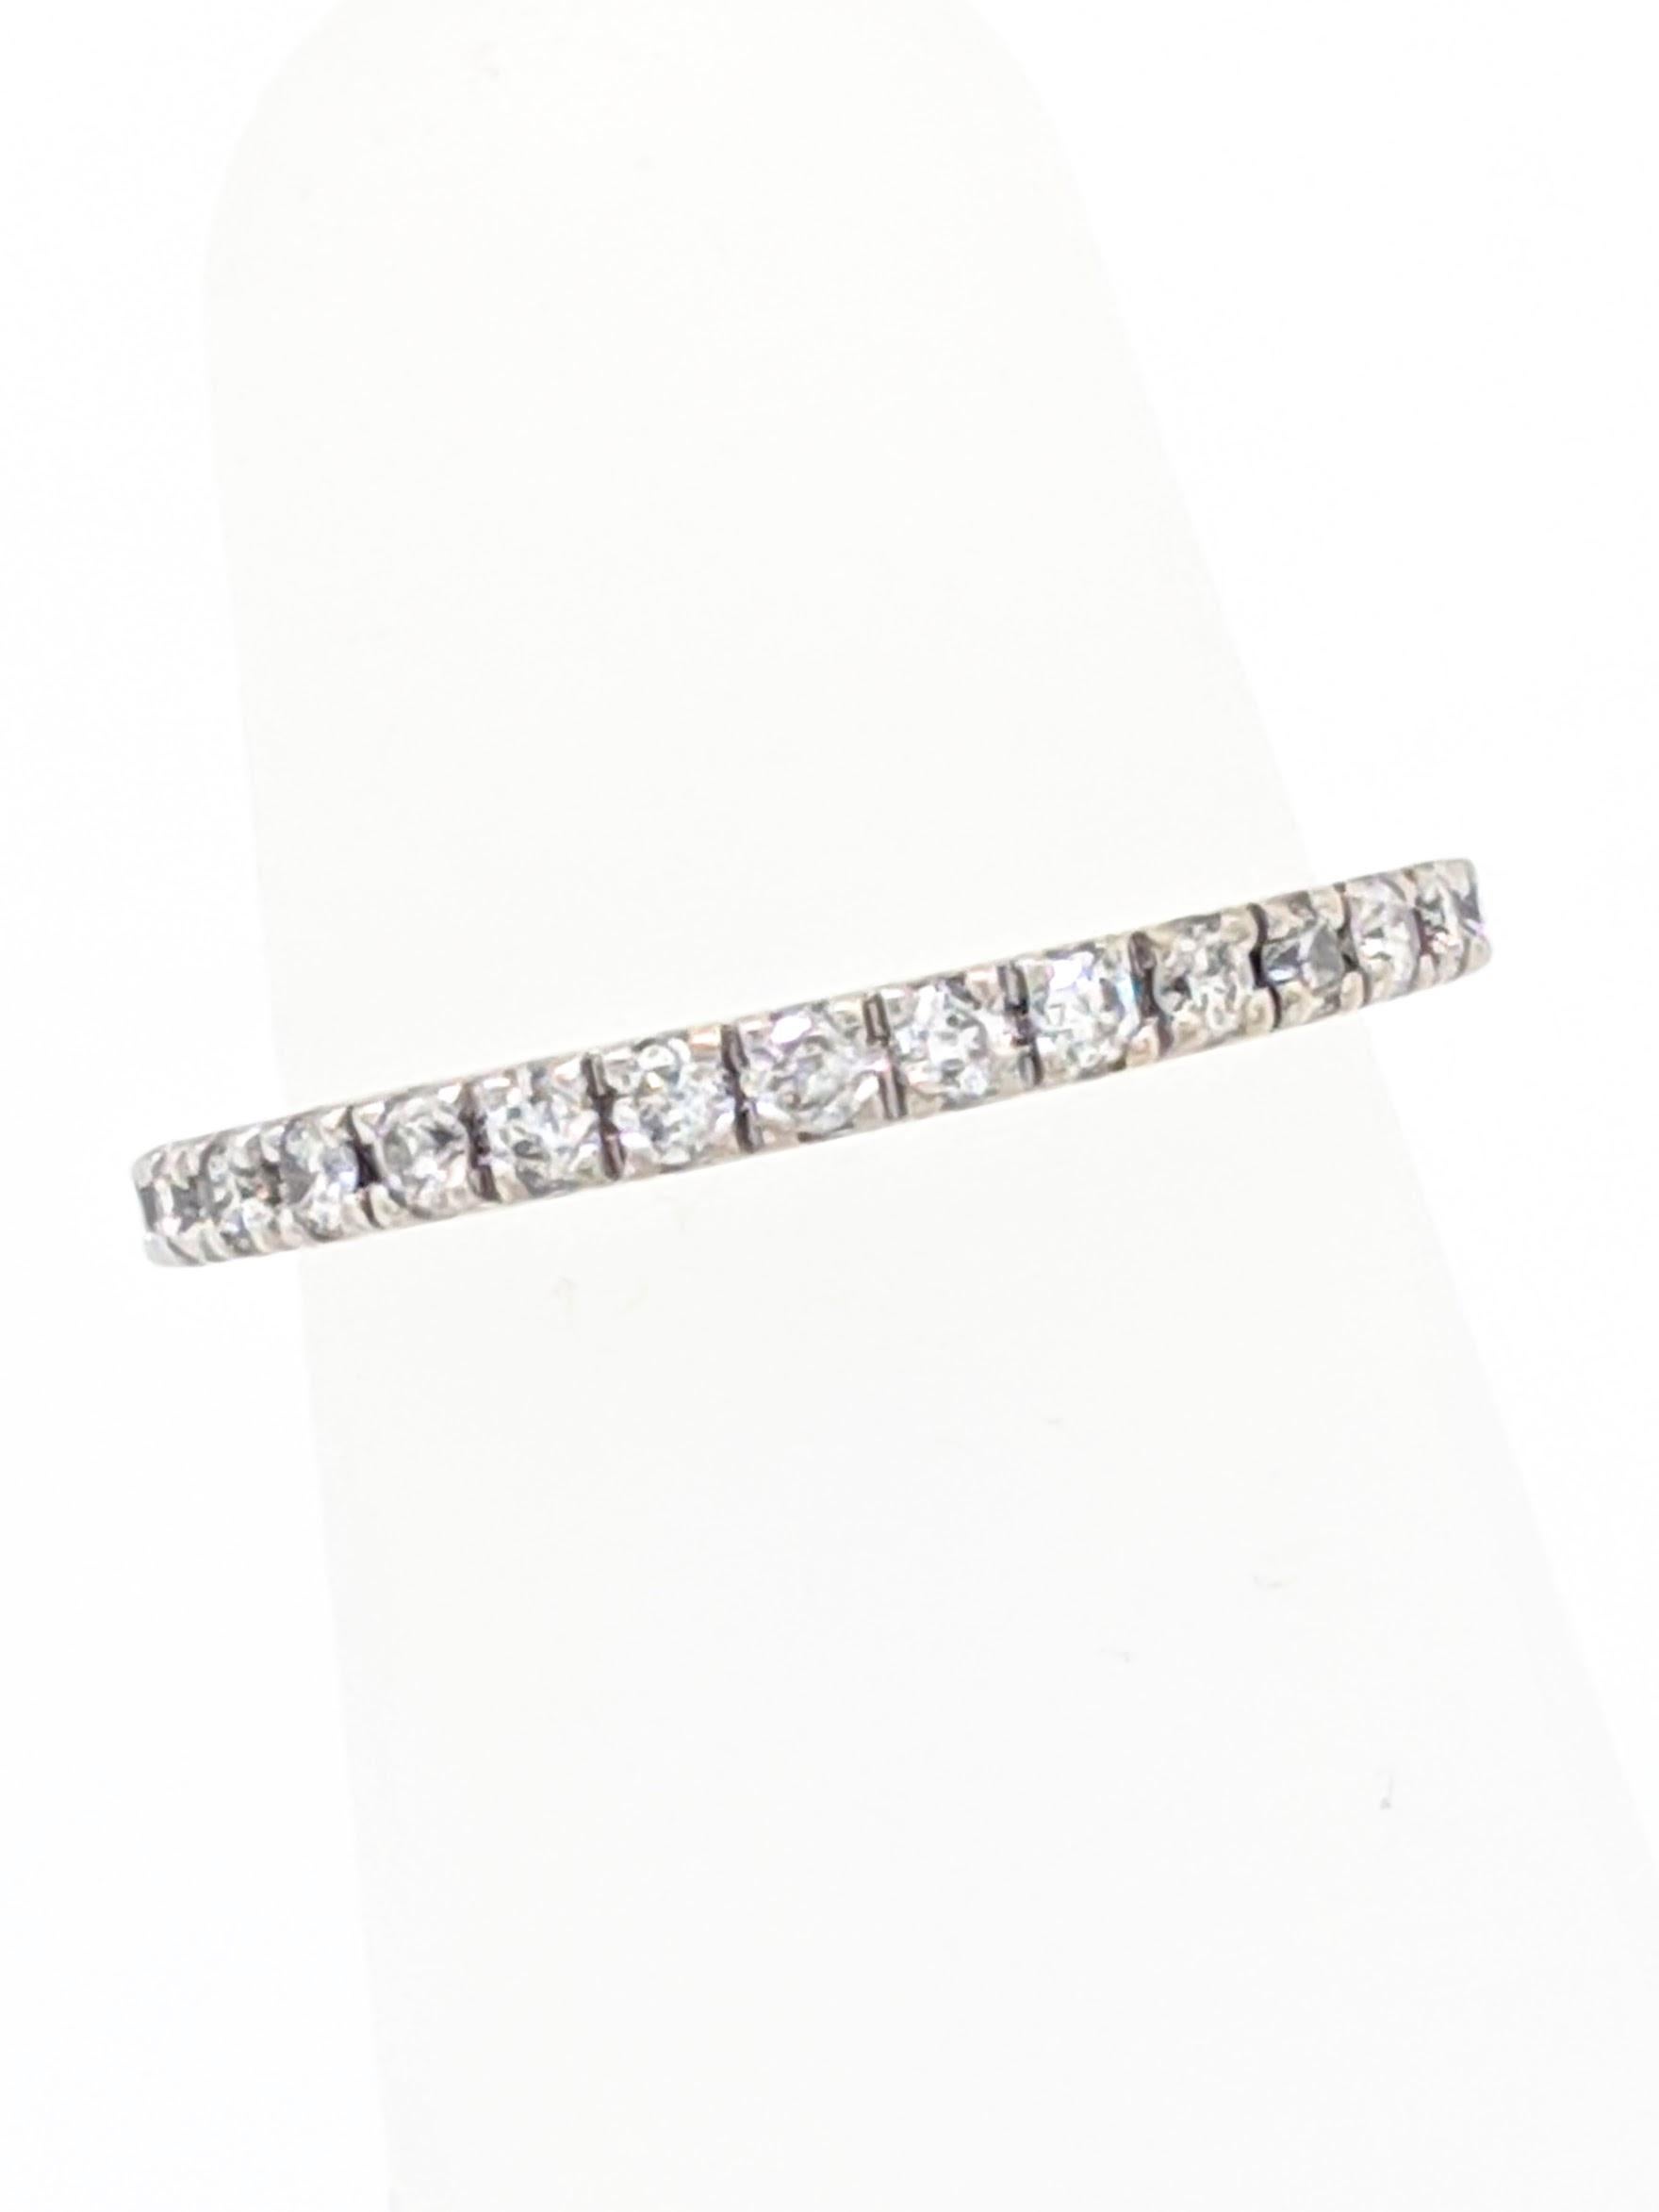 14K White Gold .20ctw Diamond Stackable Anniversary Wedding Band Ring

You are viewing a Beautiful Diamond Stackable Wedding Band. This ring is crafted from 14k white gold and weighs 1.6 gram. It features (17) .015ct natural round brilliant cut